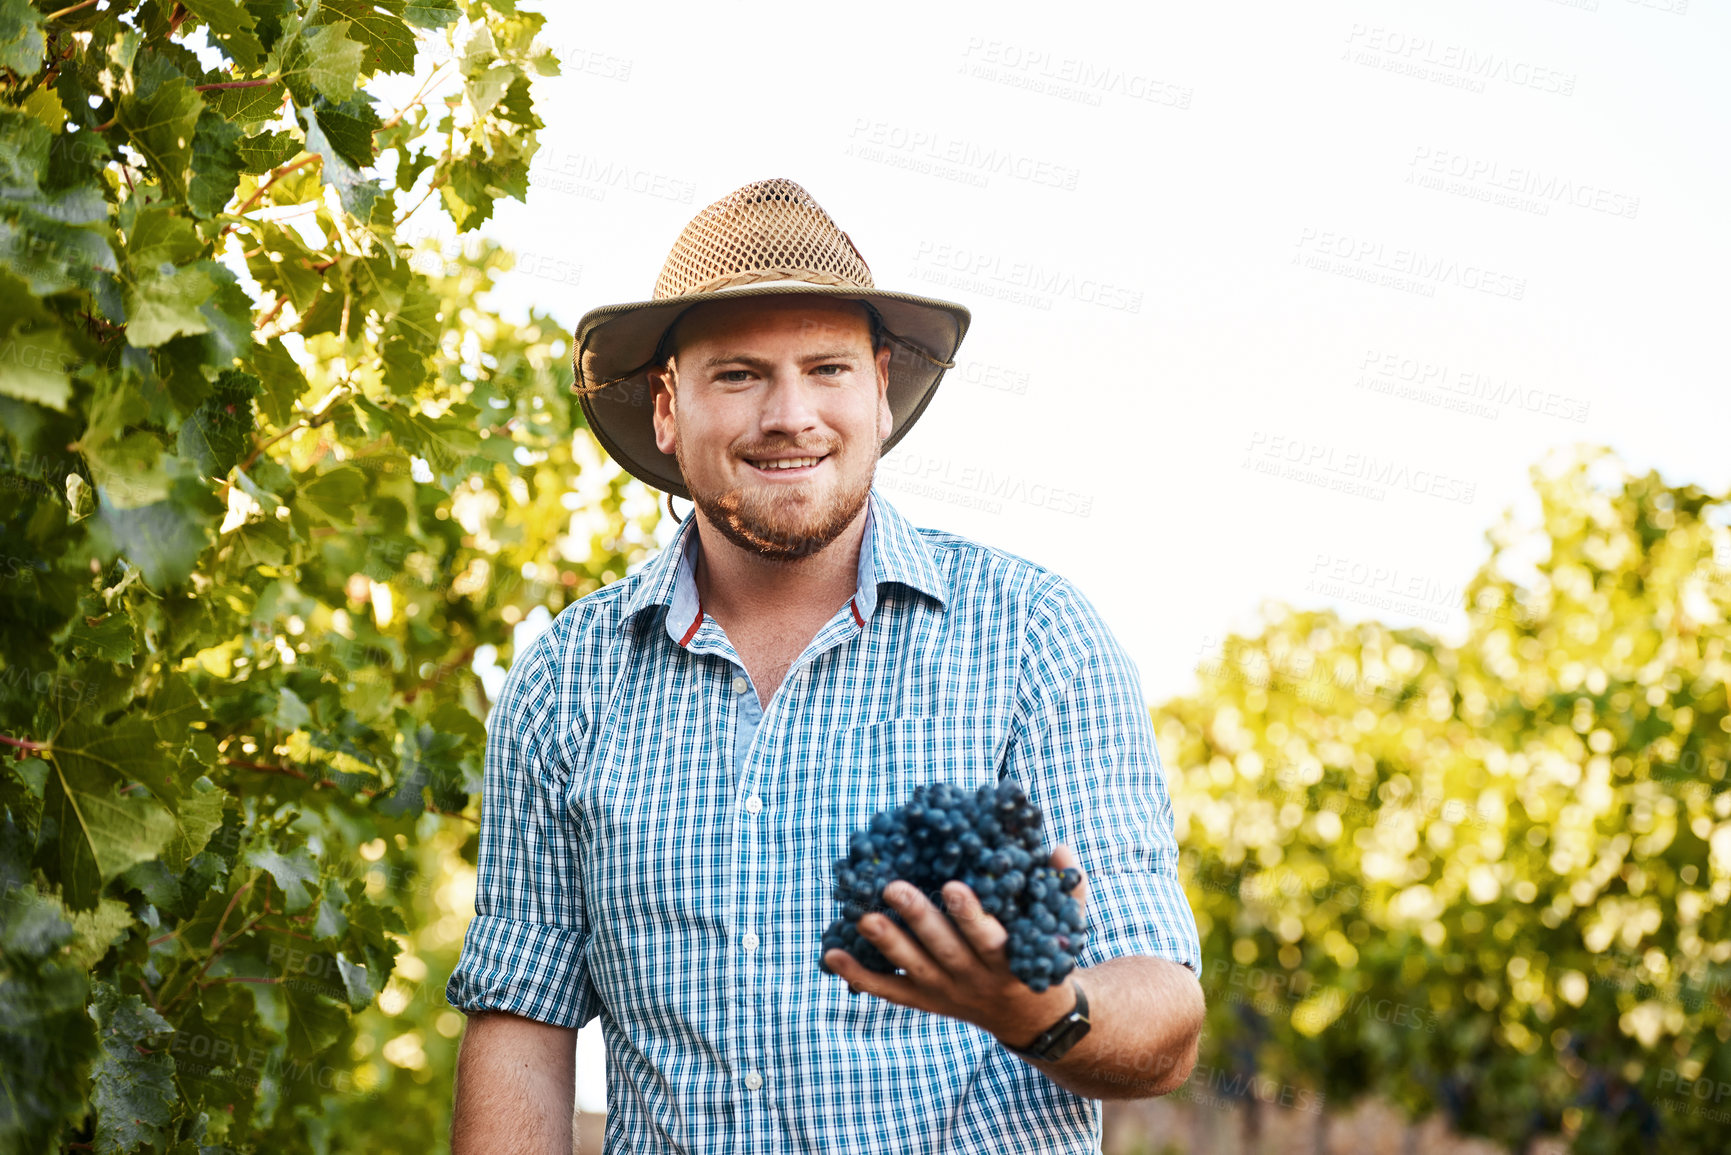 Buy stock photo Portrait of a farmer holding a bunch of grapes in a vineyard